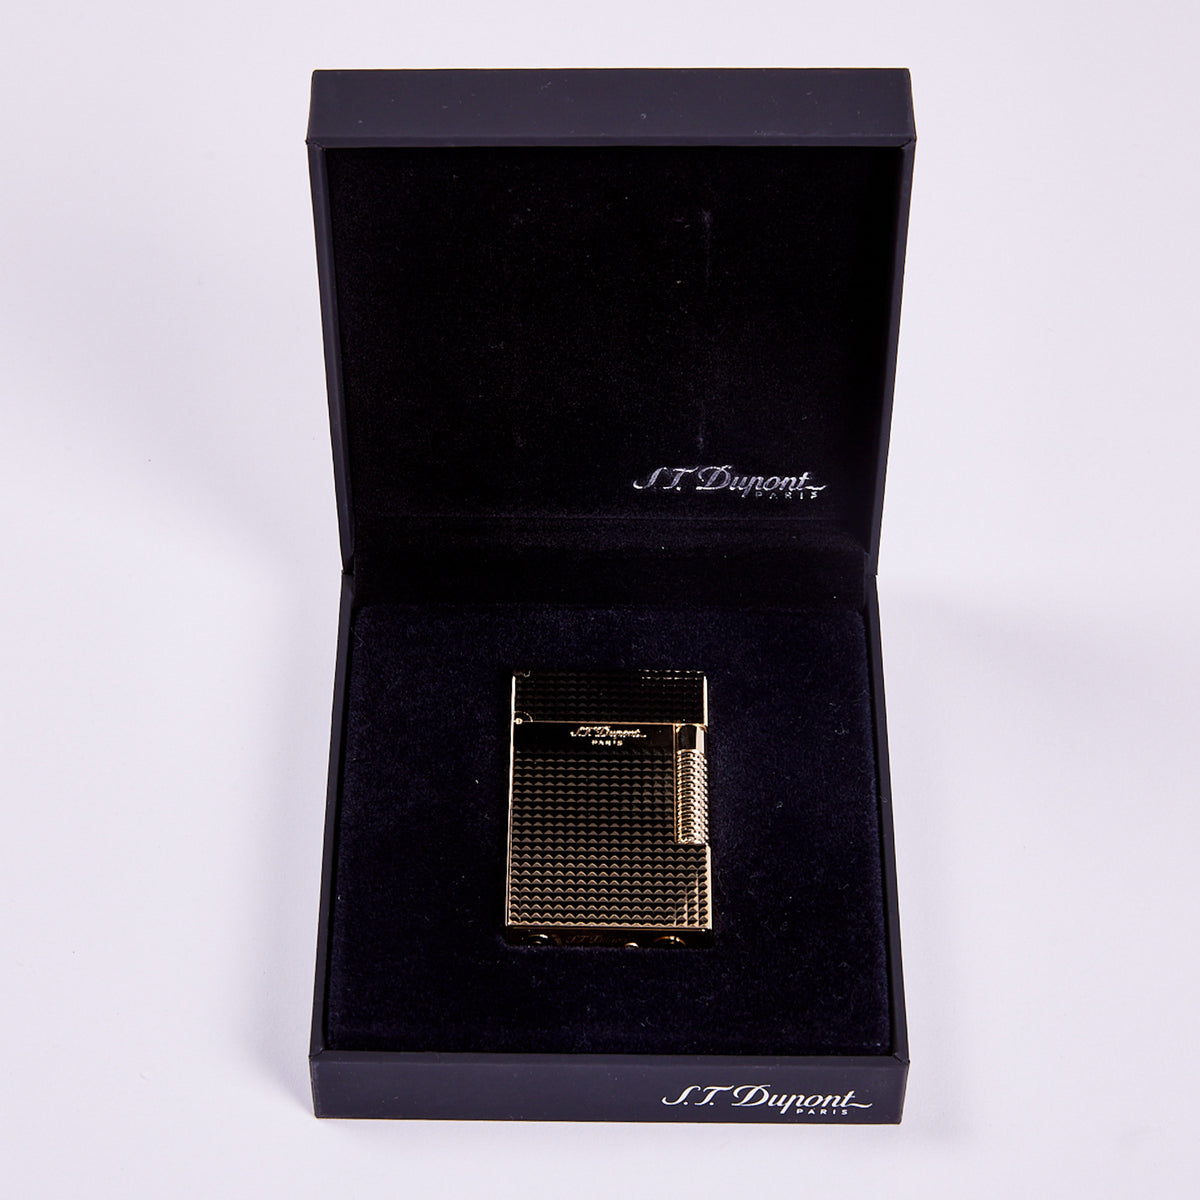 S.T. Dupont Le Grand Cling Diamond Head Gold Lighter